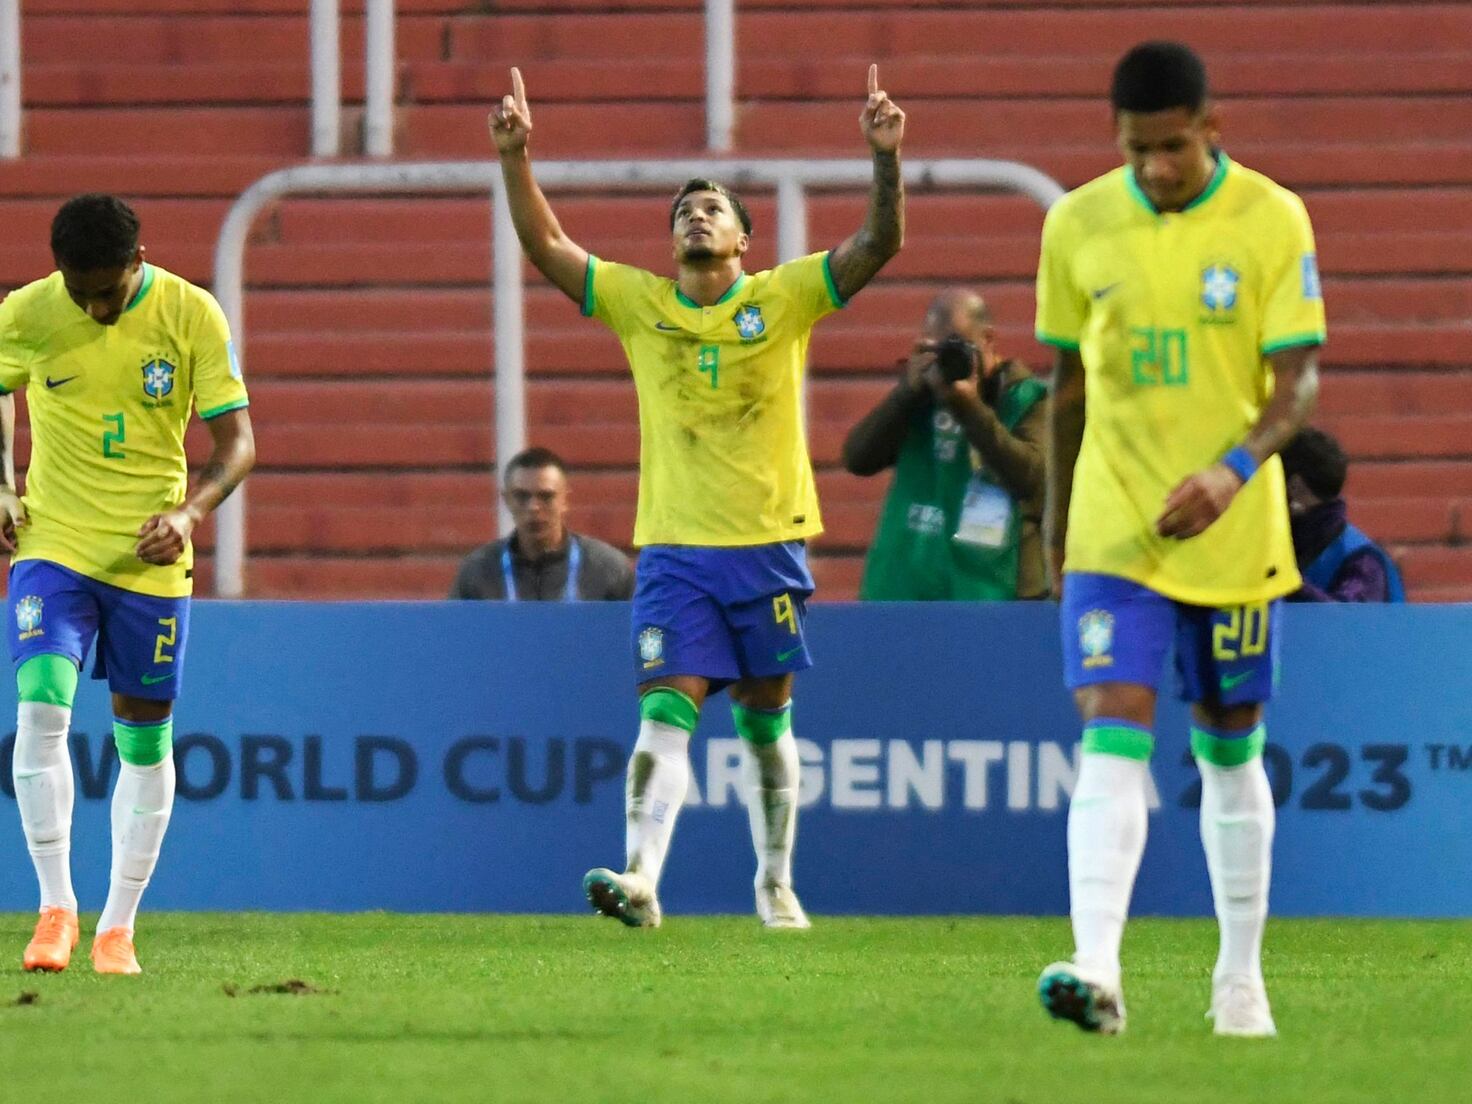 Brazil bounce back at Under-20 World Cup but Italy beaten